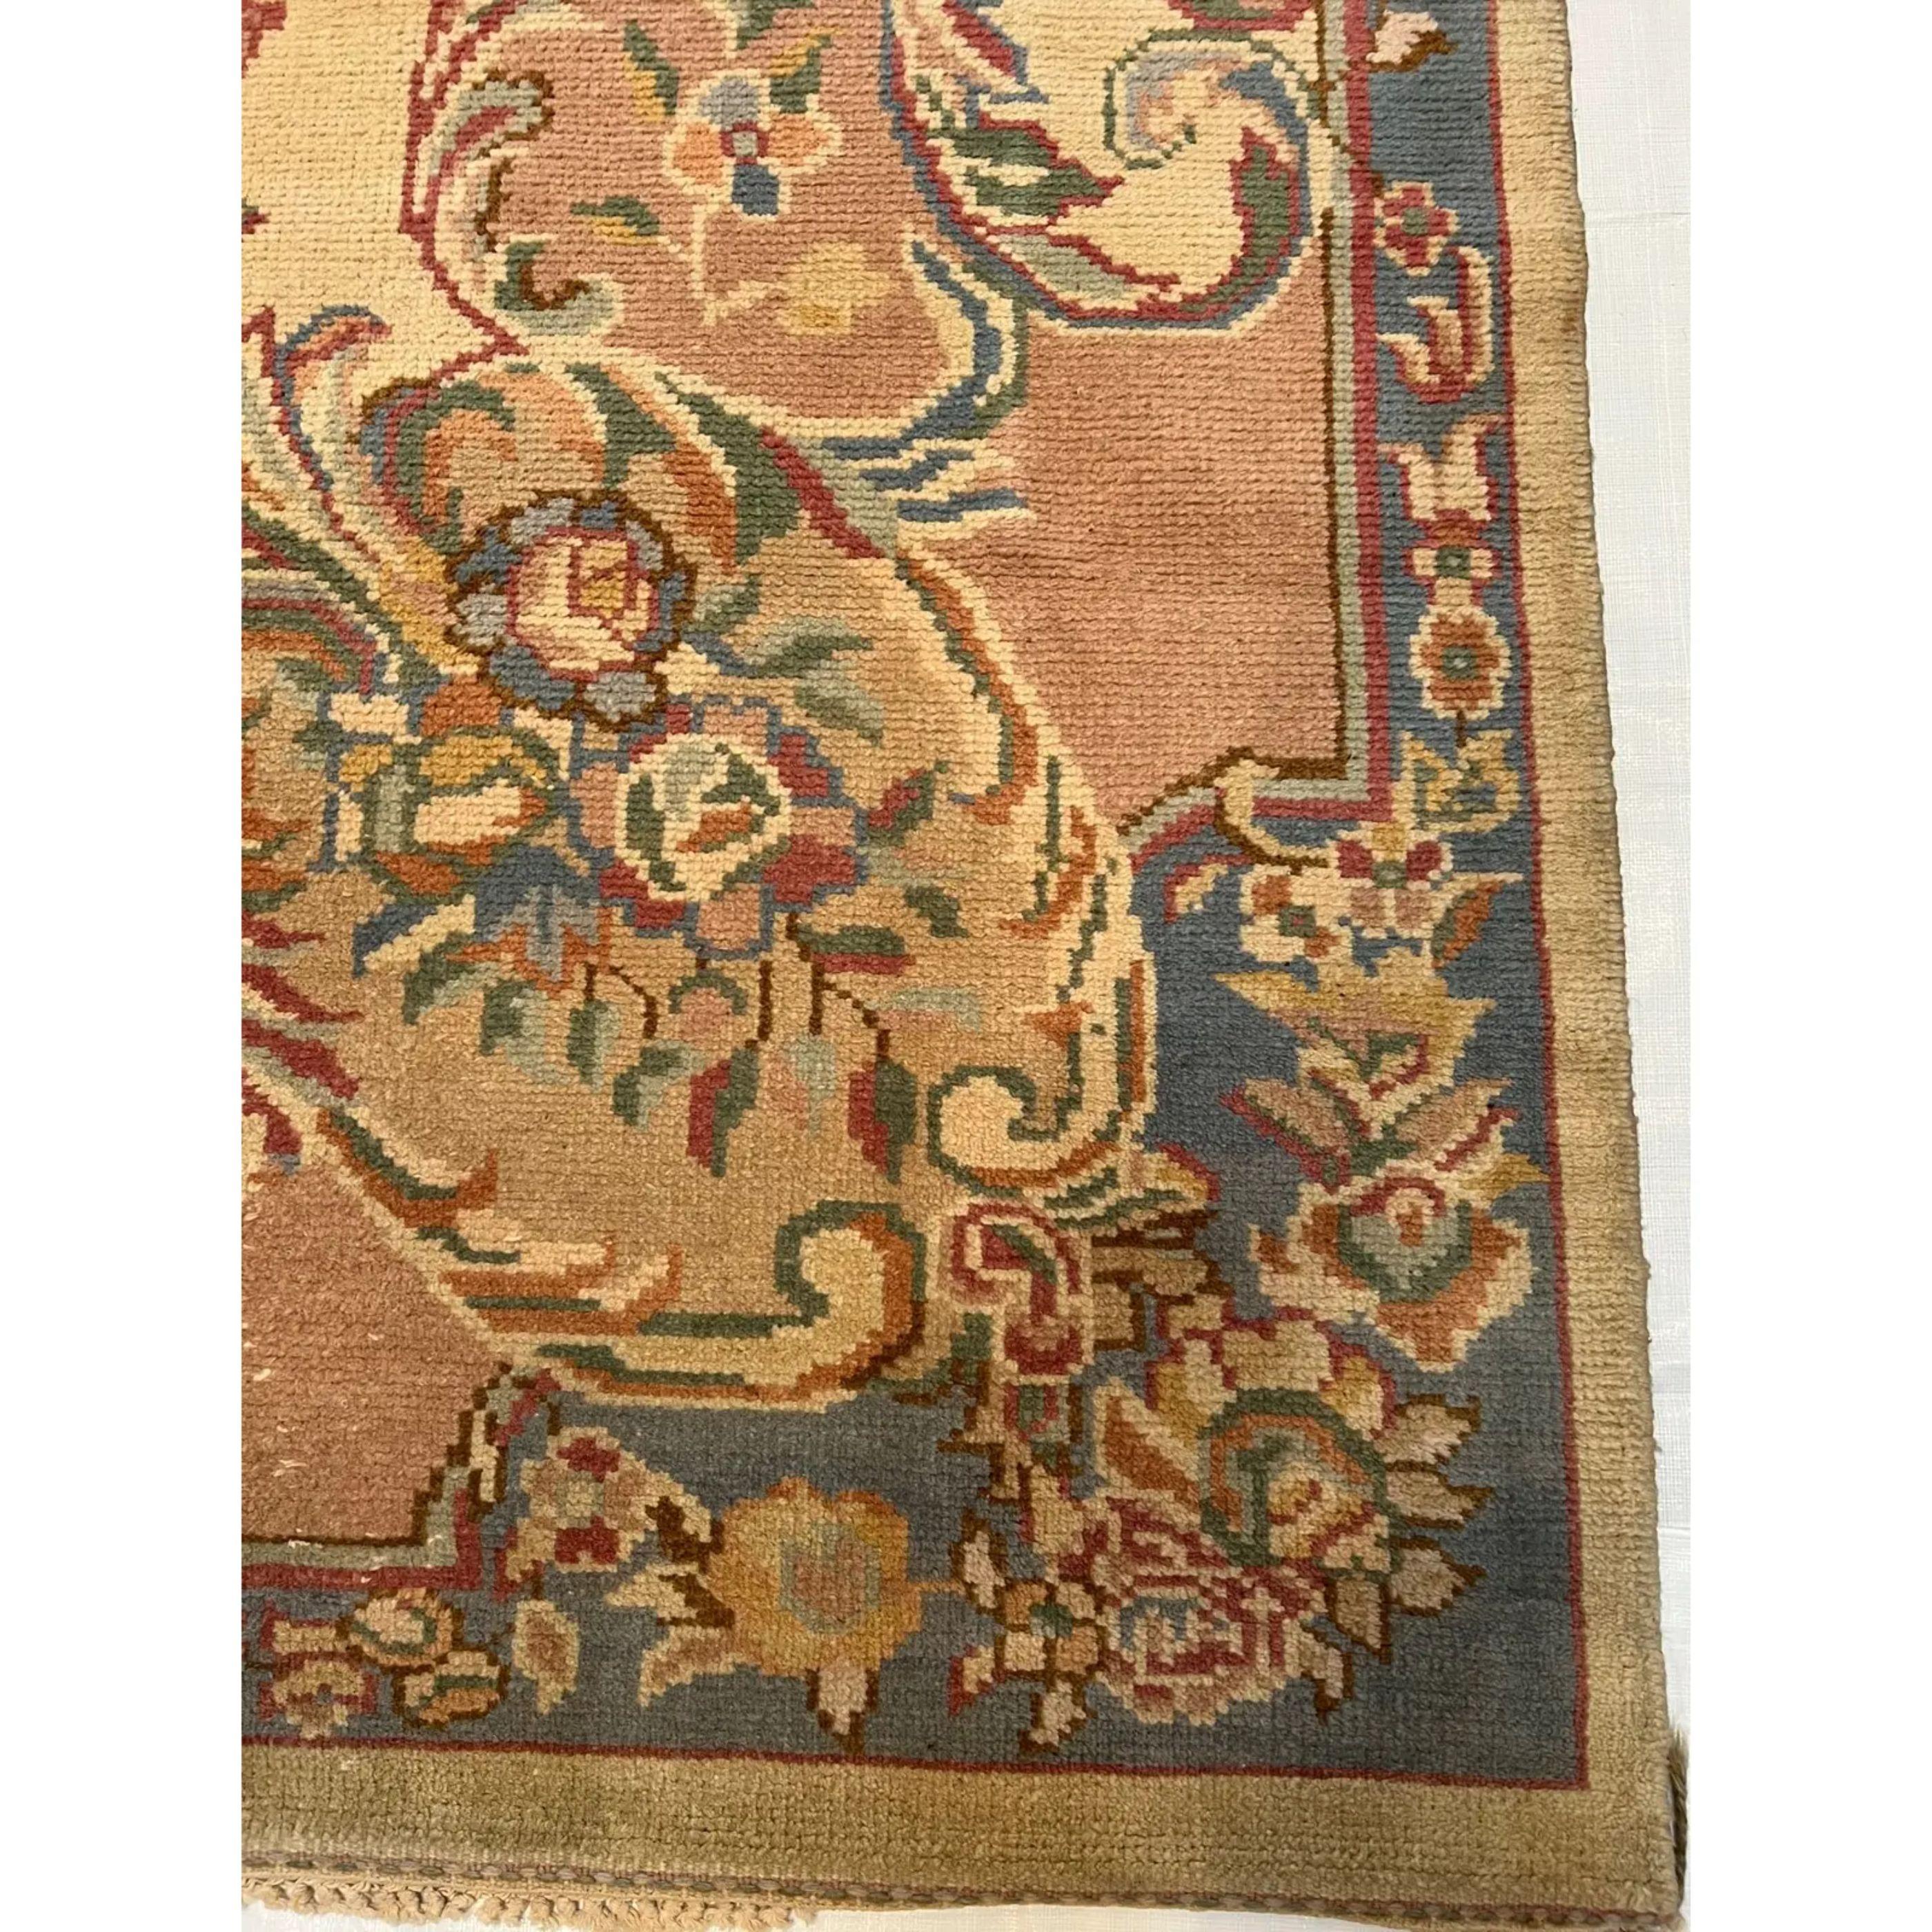 Other Early 20th Century Antique Indian Rug For Sale